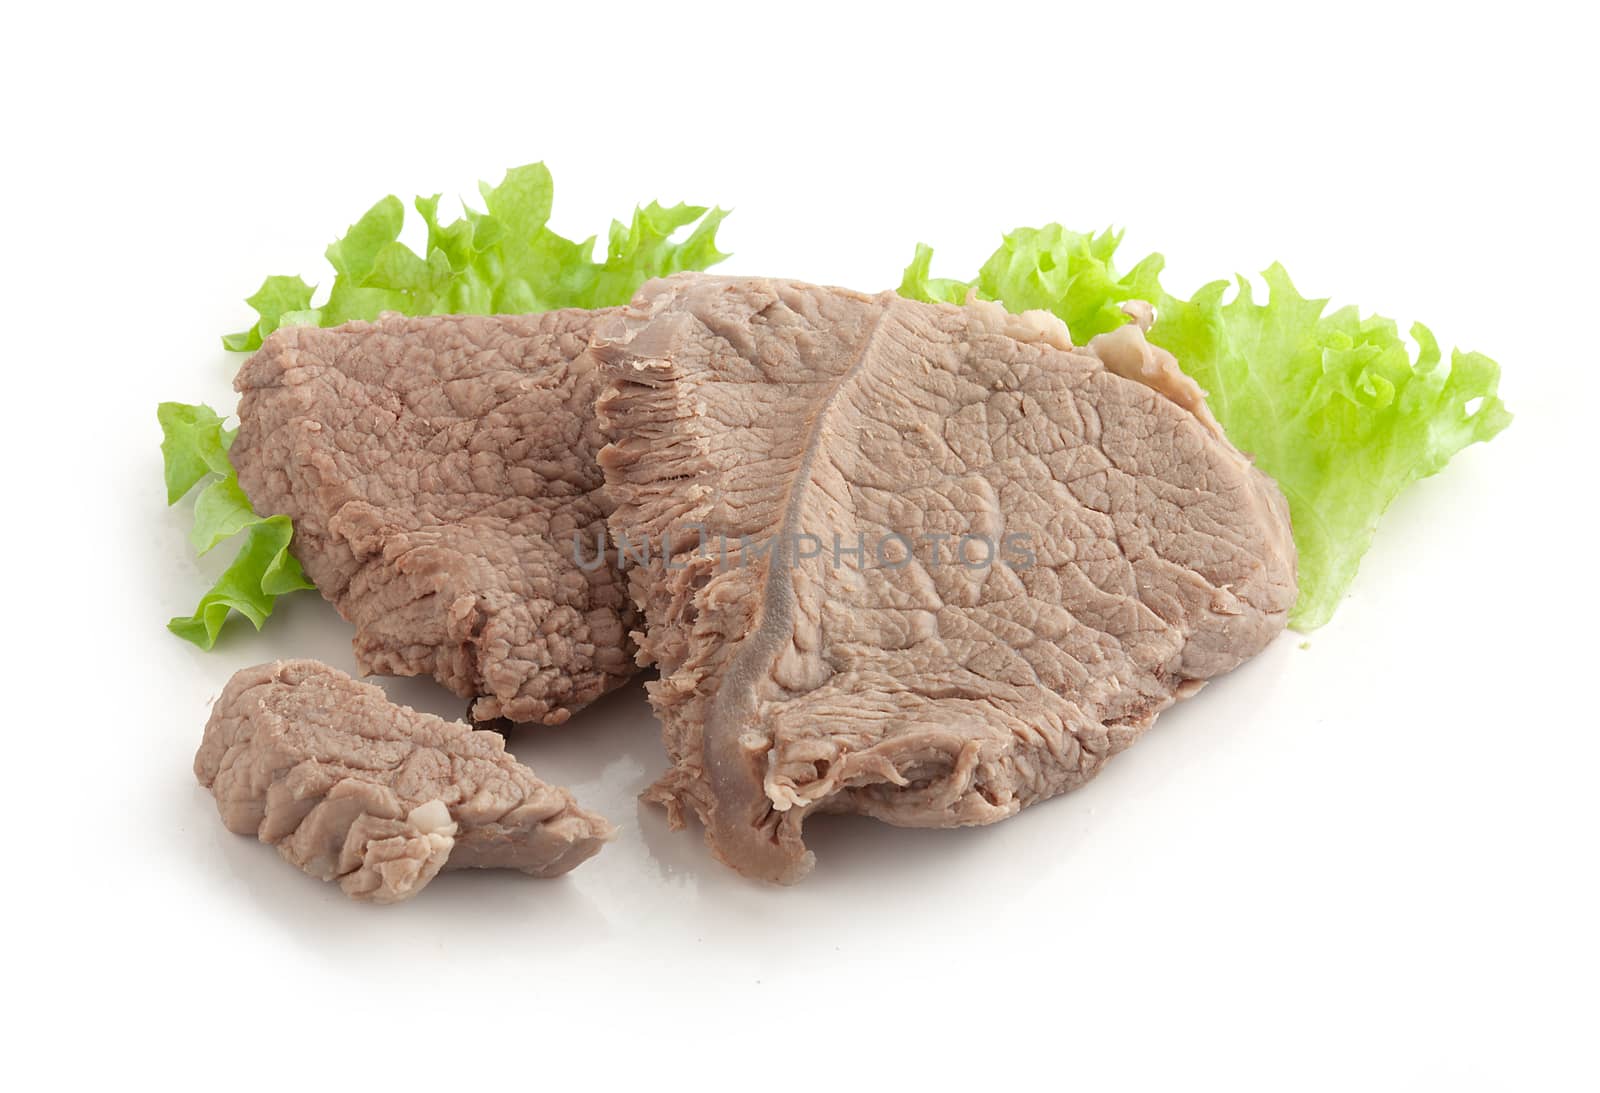 Isolated cooked beef and fresh green lettuce